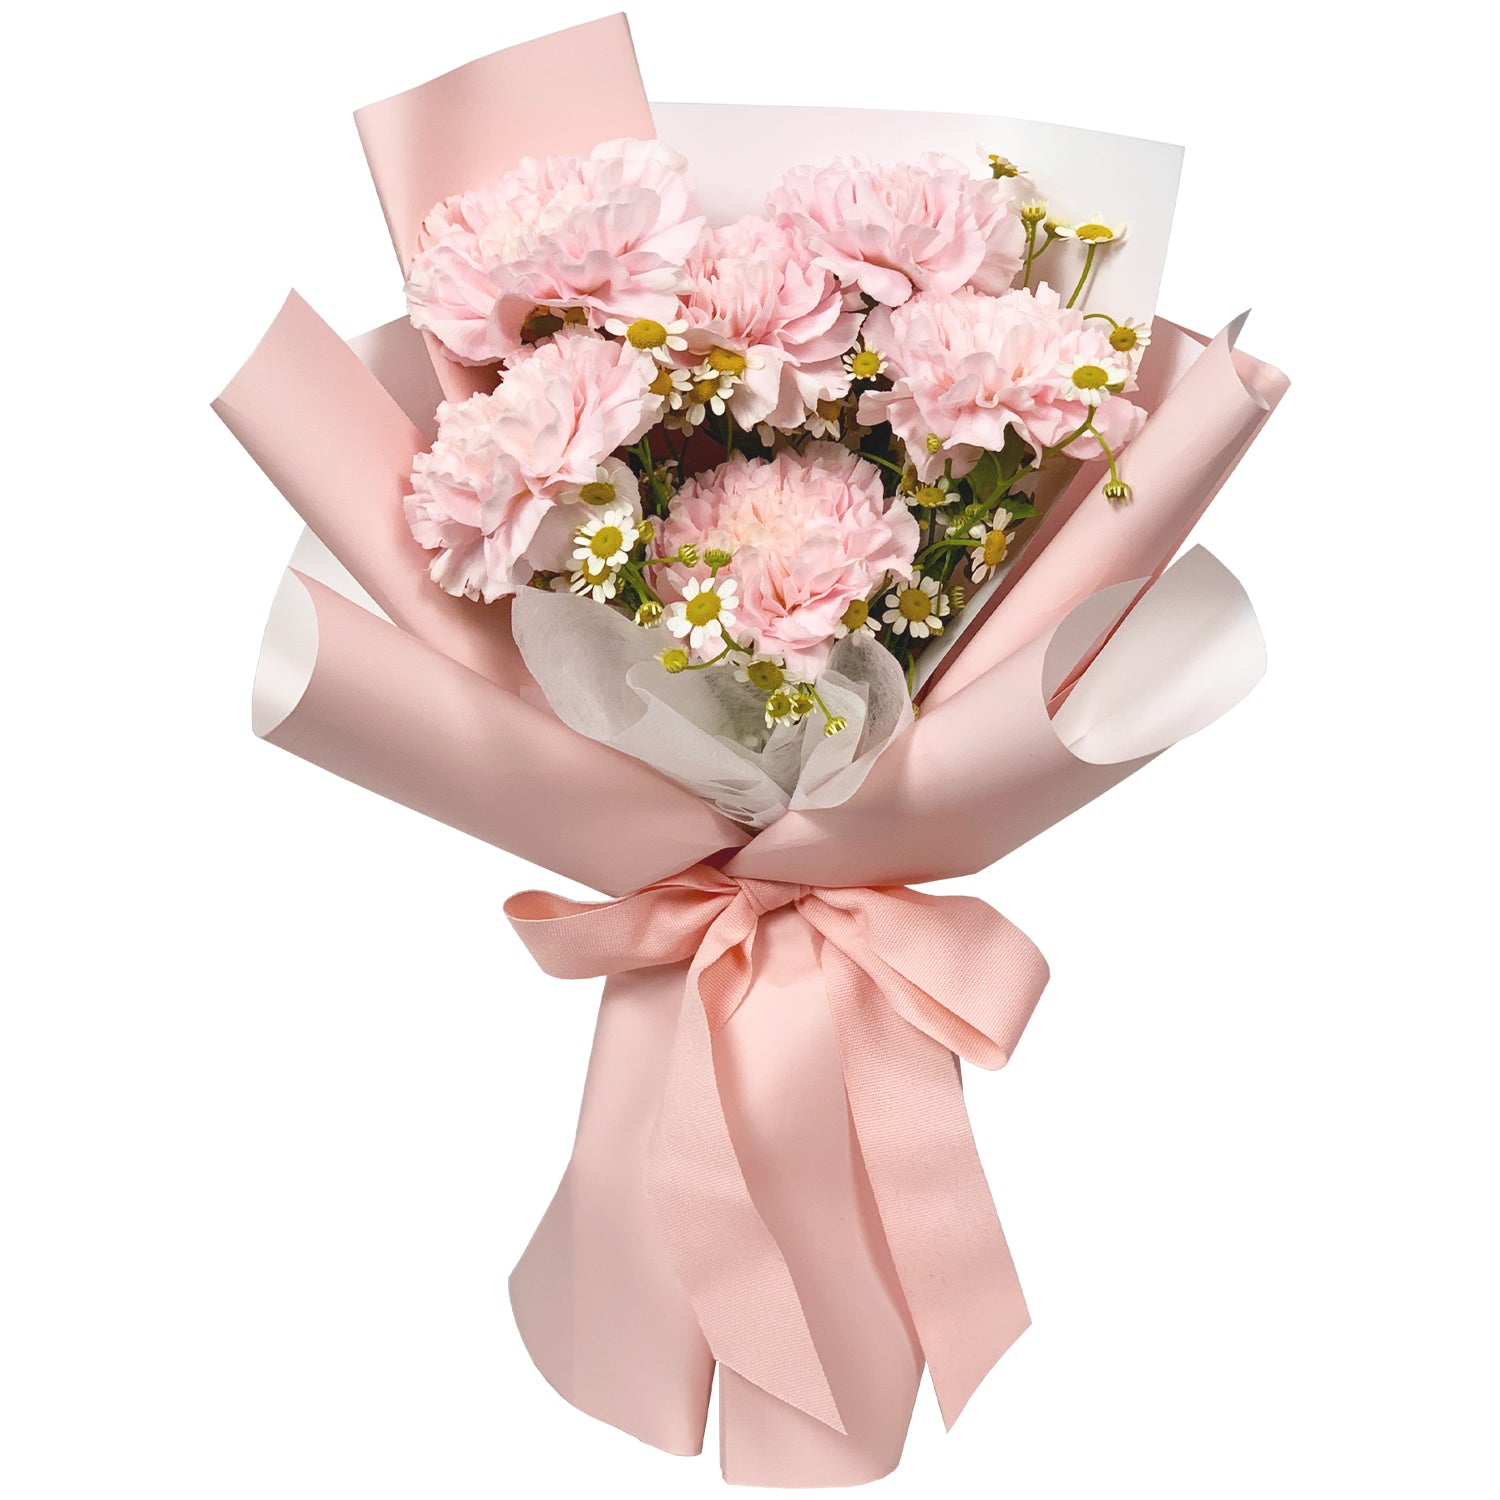 Ava Daisy Fresh Flower Bouquet  Giftr - Malaysia's Leading Online Gift Shop